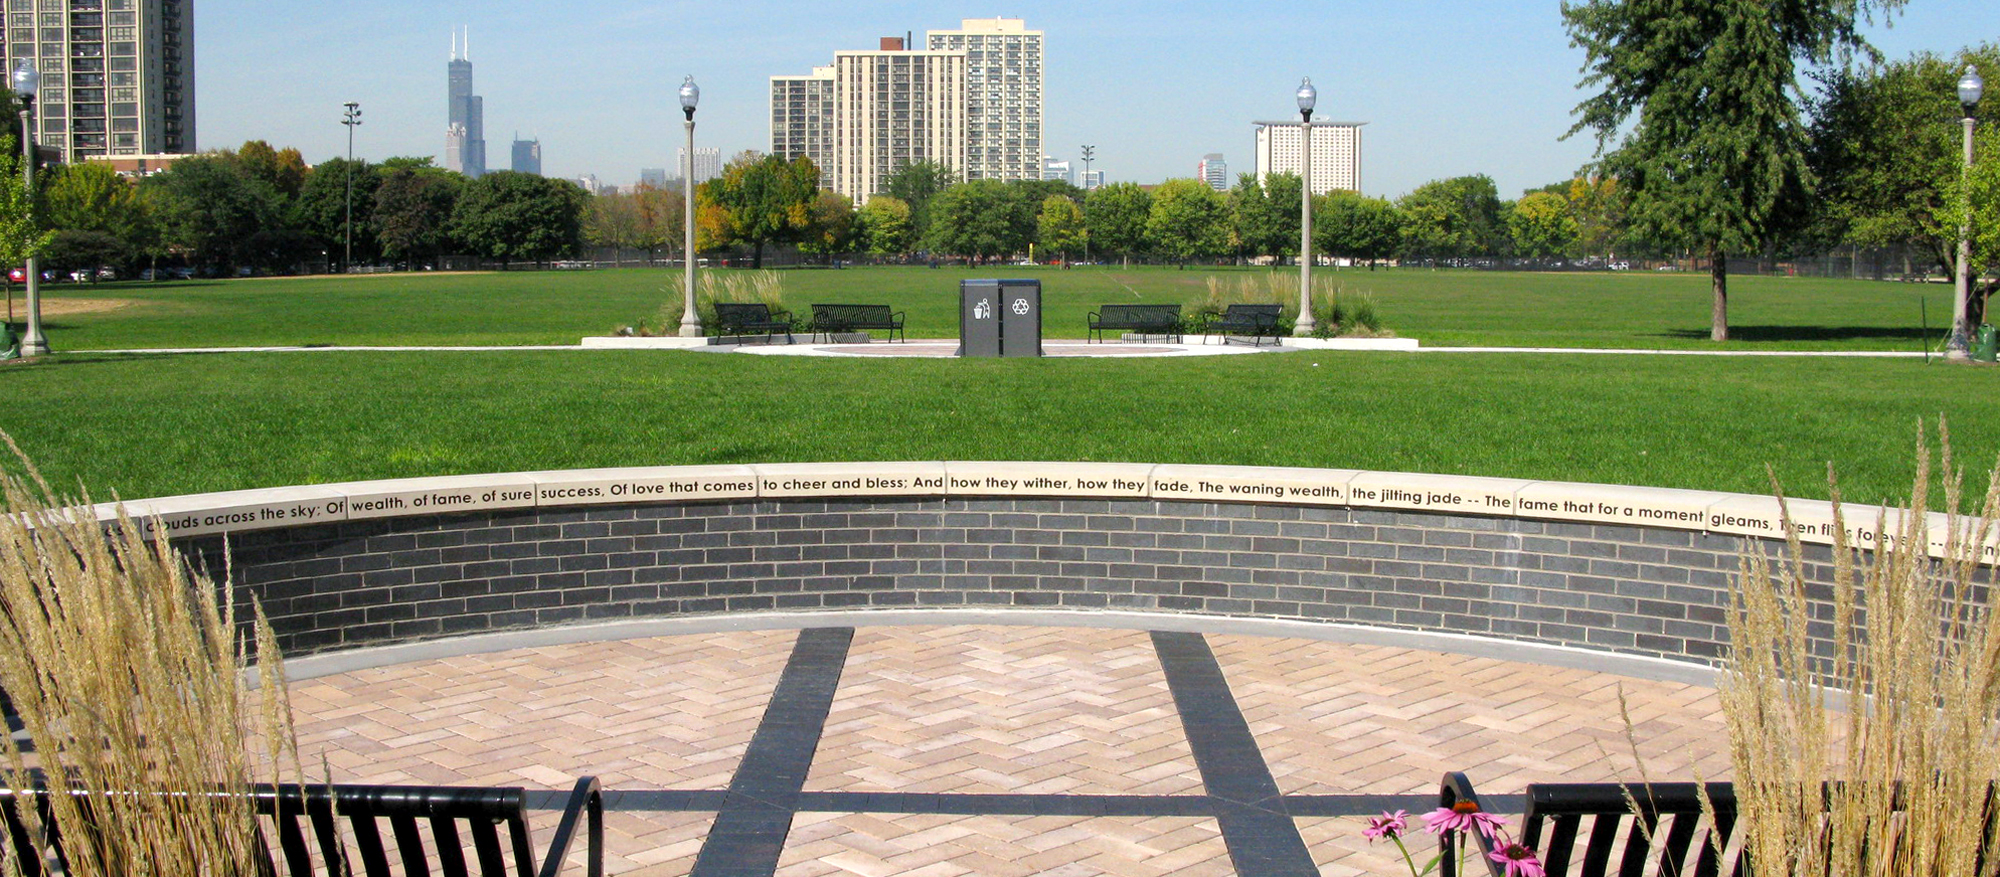 In a city park is a round plaza with contrasting lines of black Series on light Eco-Priora™ pavers ringed by a wall with a poem on its ledge.